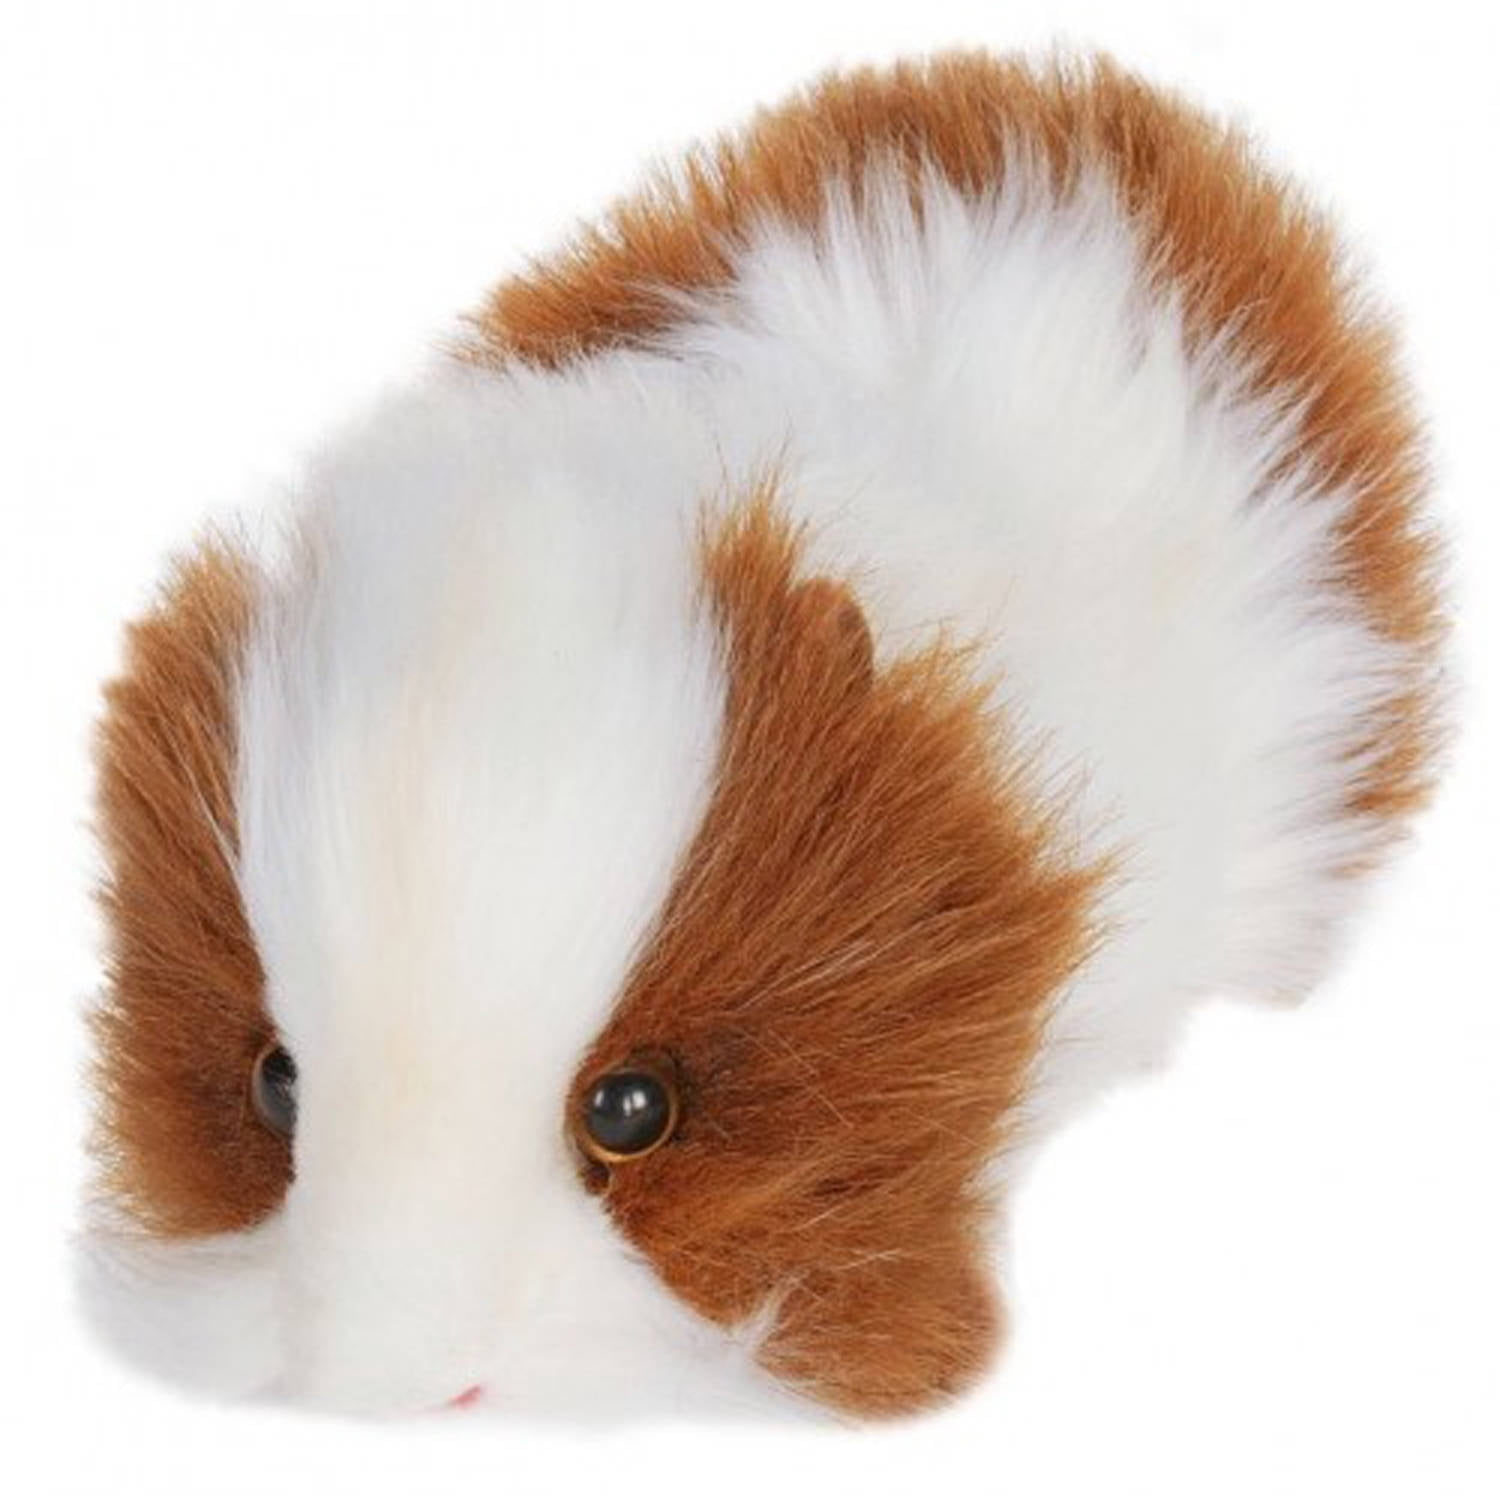 30cm brown & white 3245 Guinea Pig collectable soft toy by Hansa 